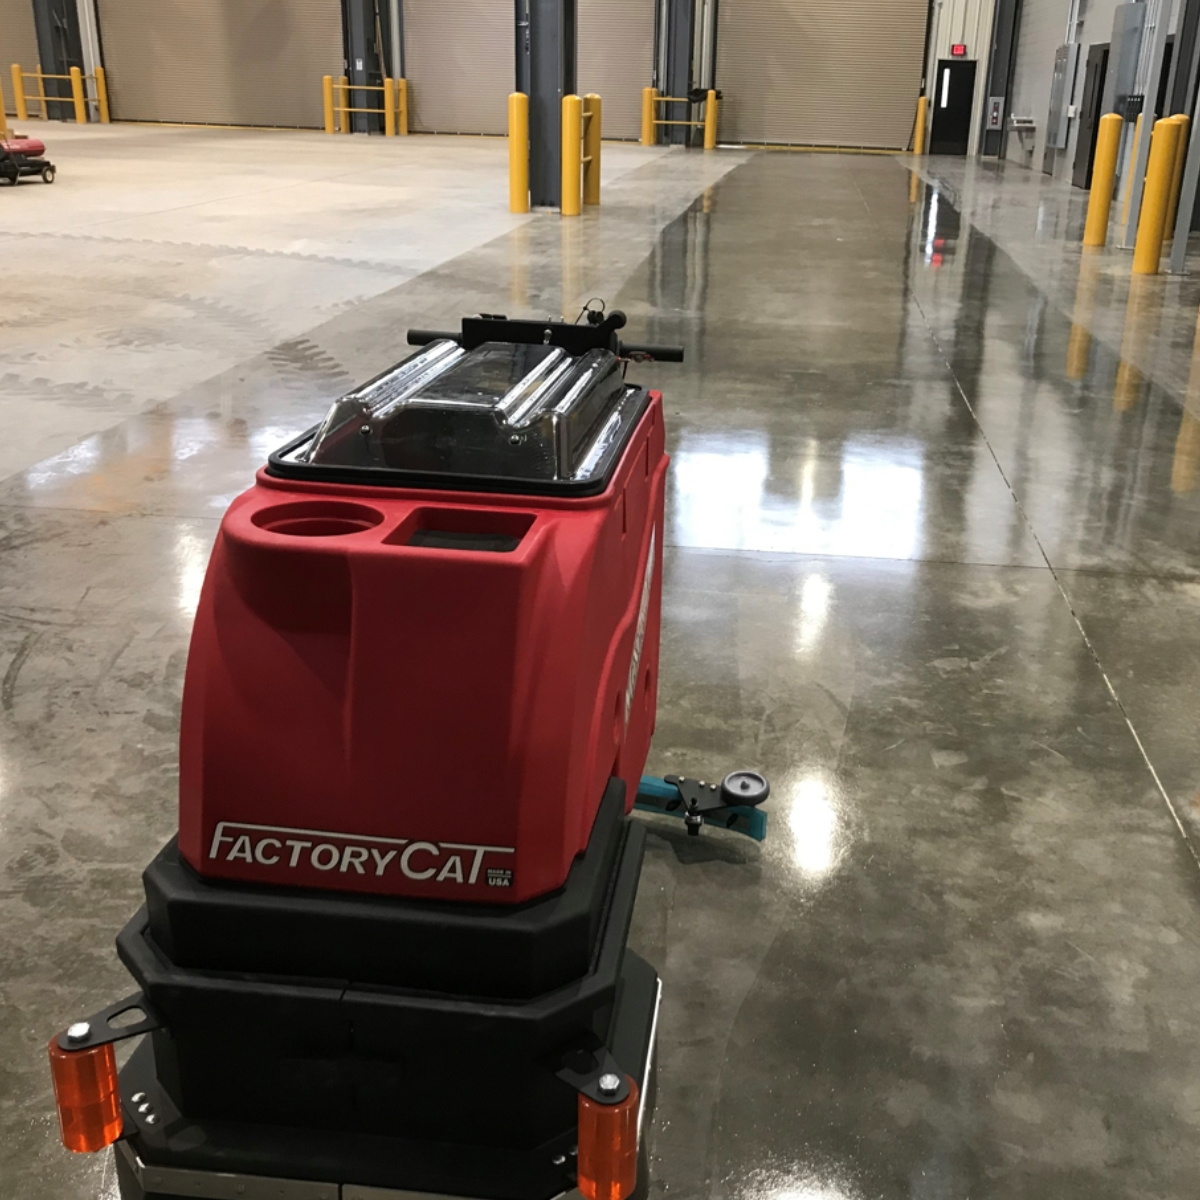 The MINI-HDWalk Behind Floor Scrubber comes equipped with a Traction drive which includes a powerful all-gear transaxle for climbing ramps and max operator ease.